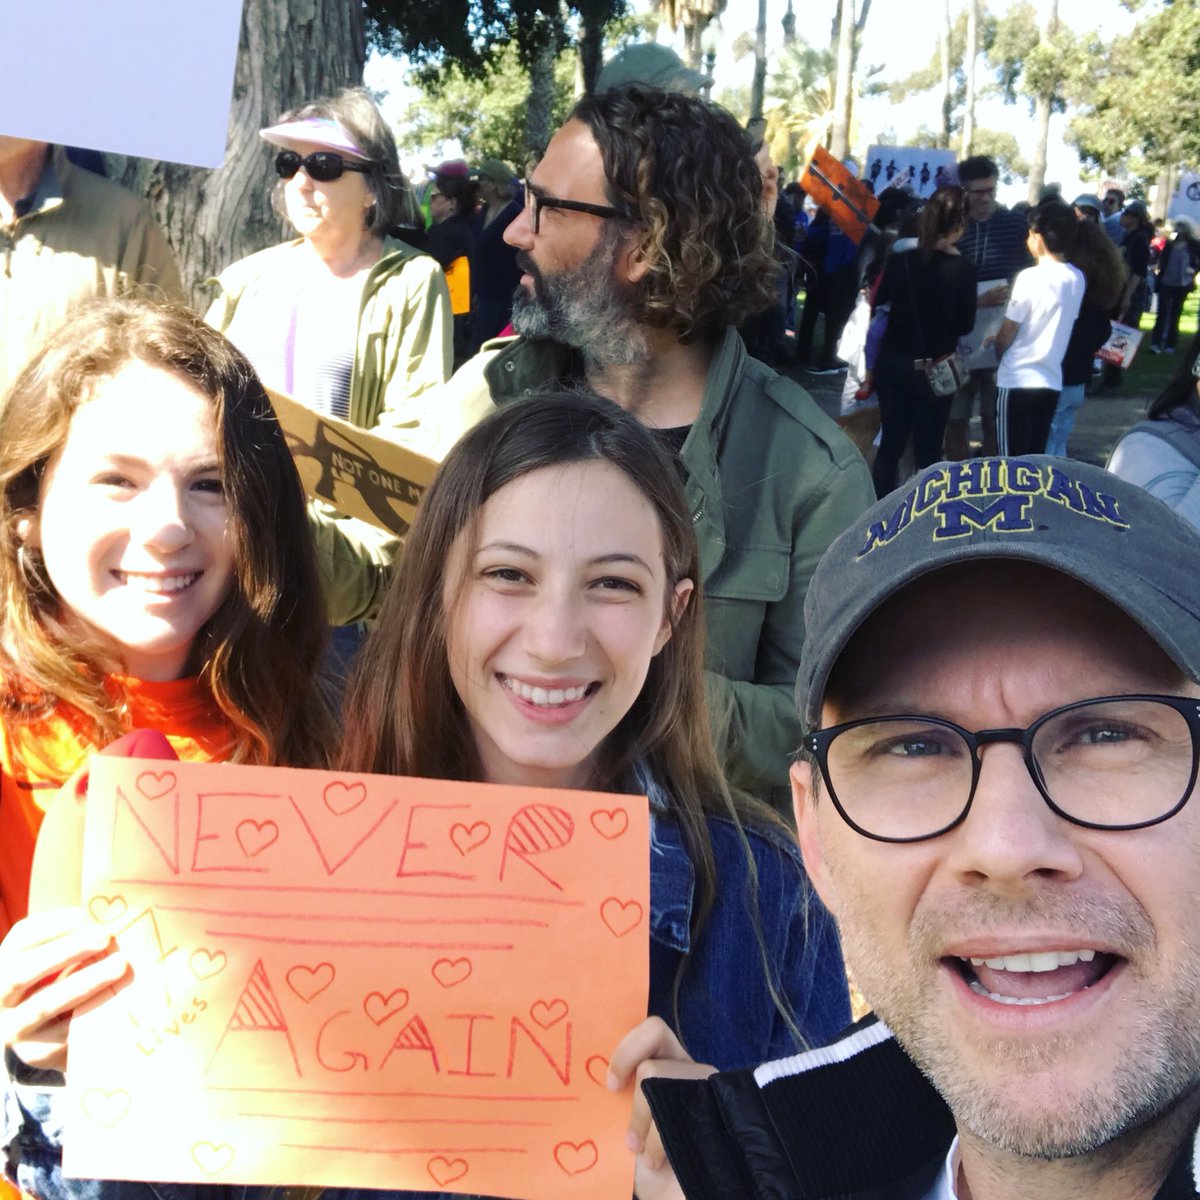 Proud to stand with students making a difference #neveragain #marchforourlives